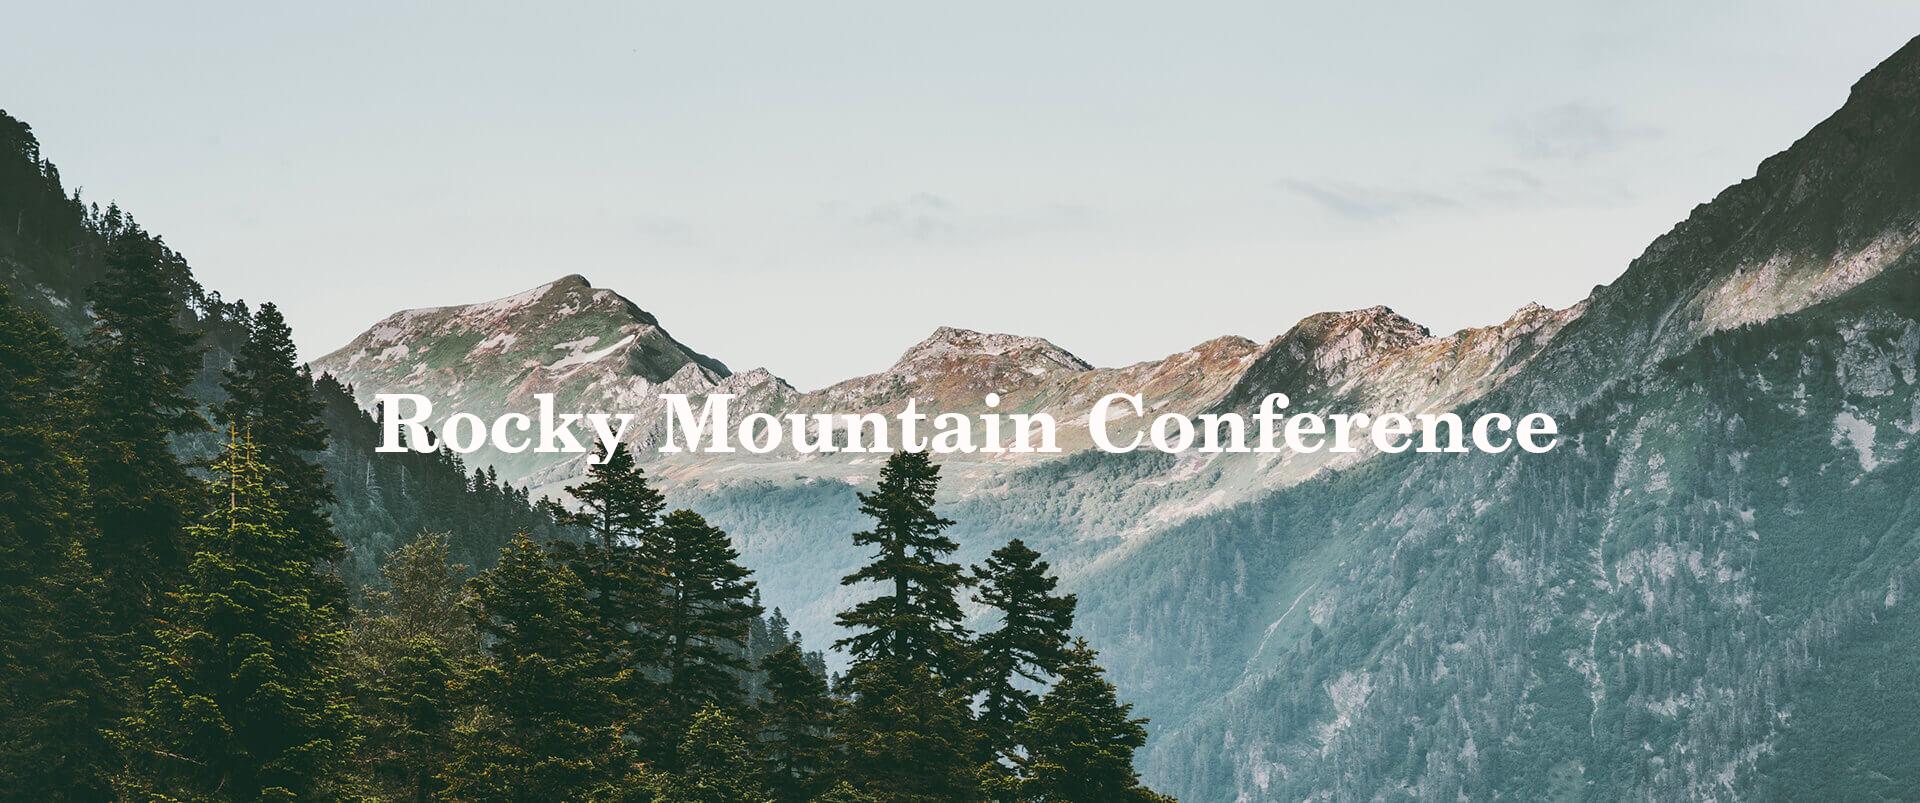 Rocky Mountain Conference, UCC